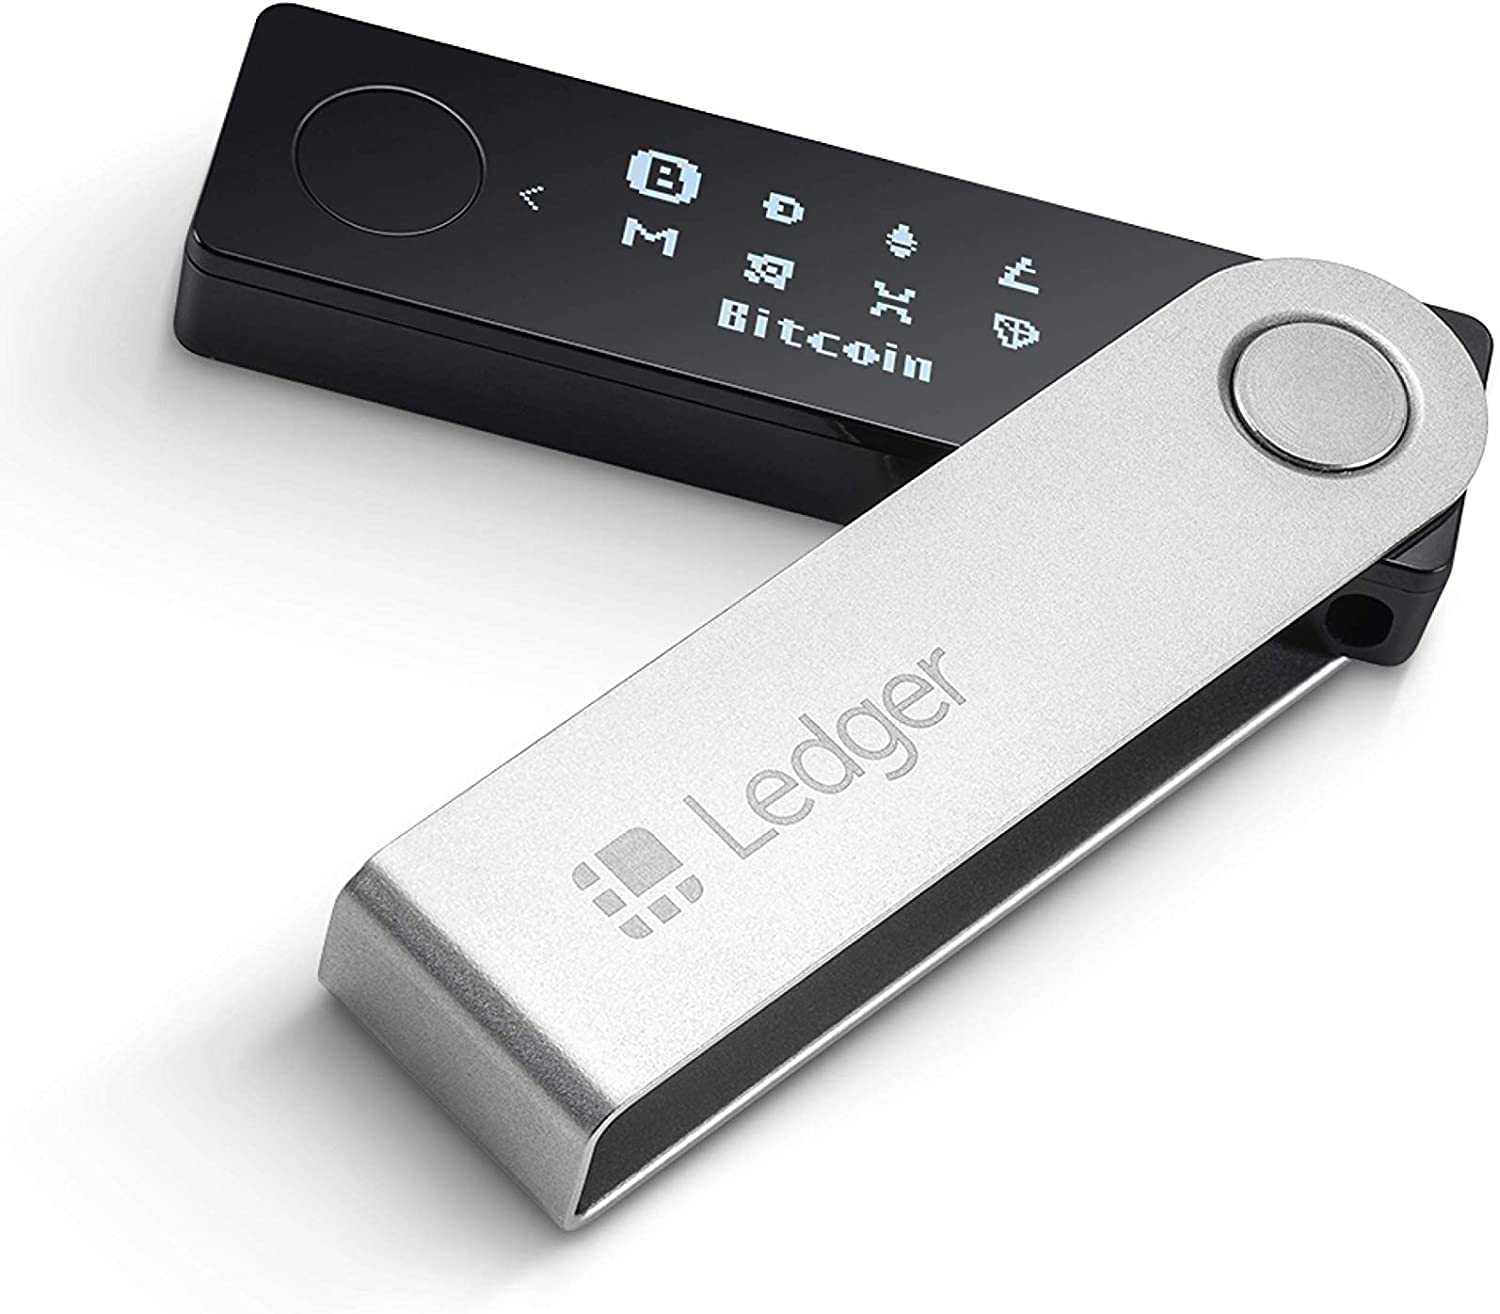 Ledger Nano S solution for stuck on ‘Update’ while updating to firmware | Arshad Mehmood